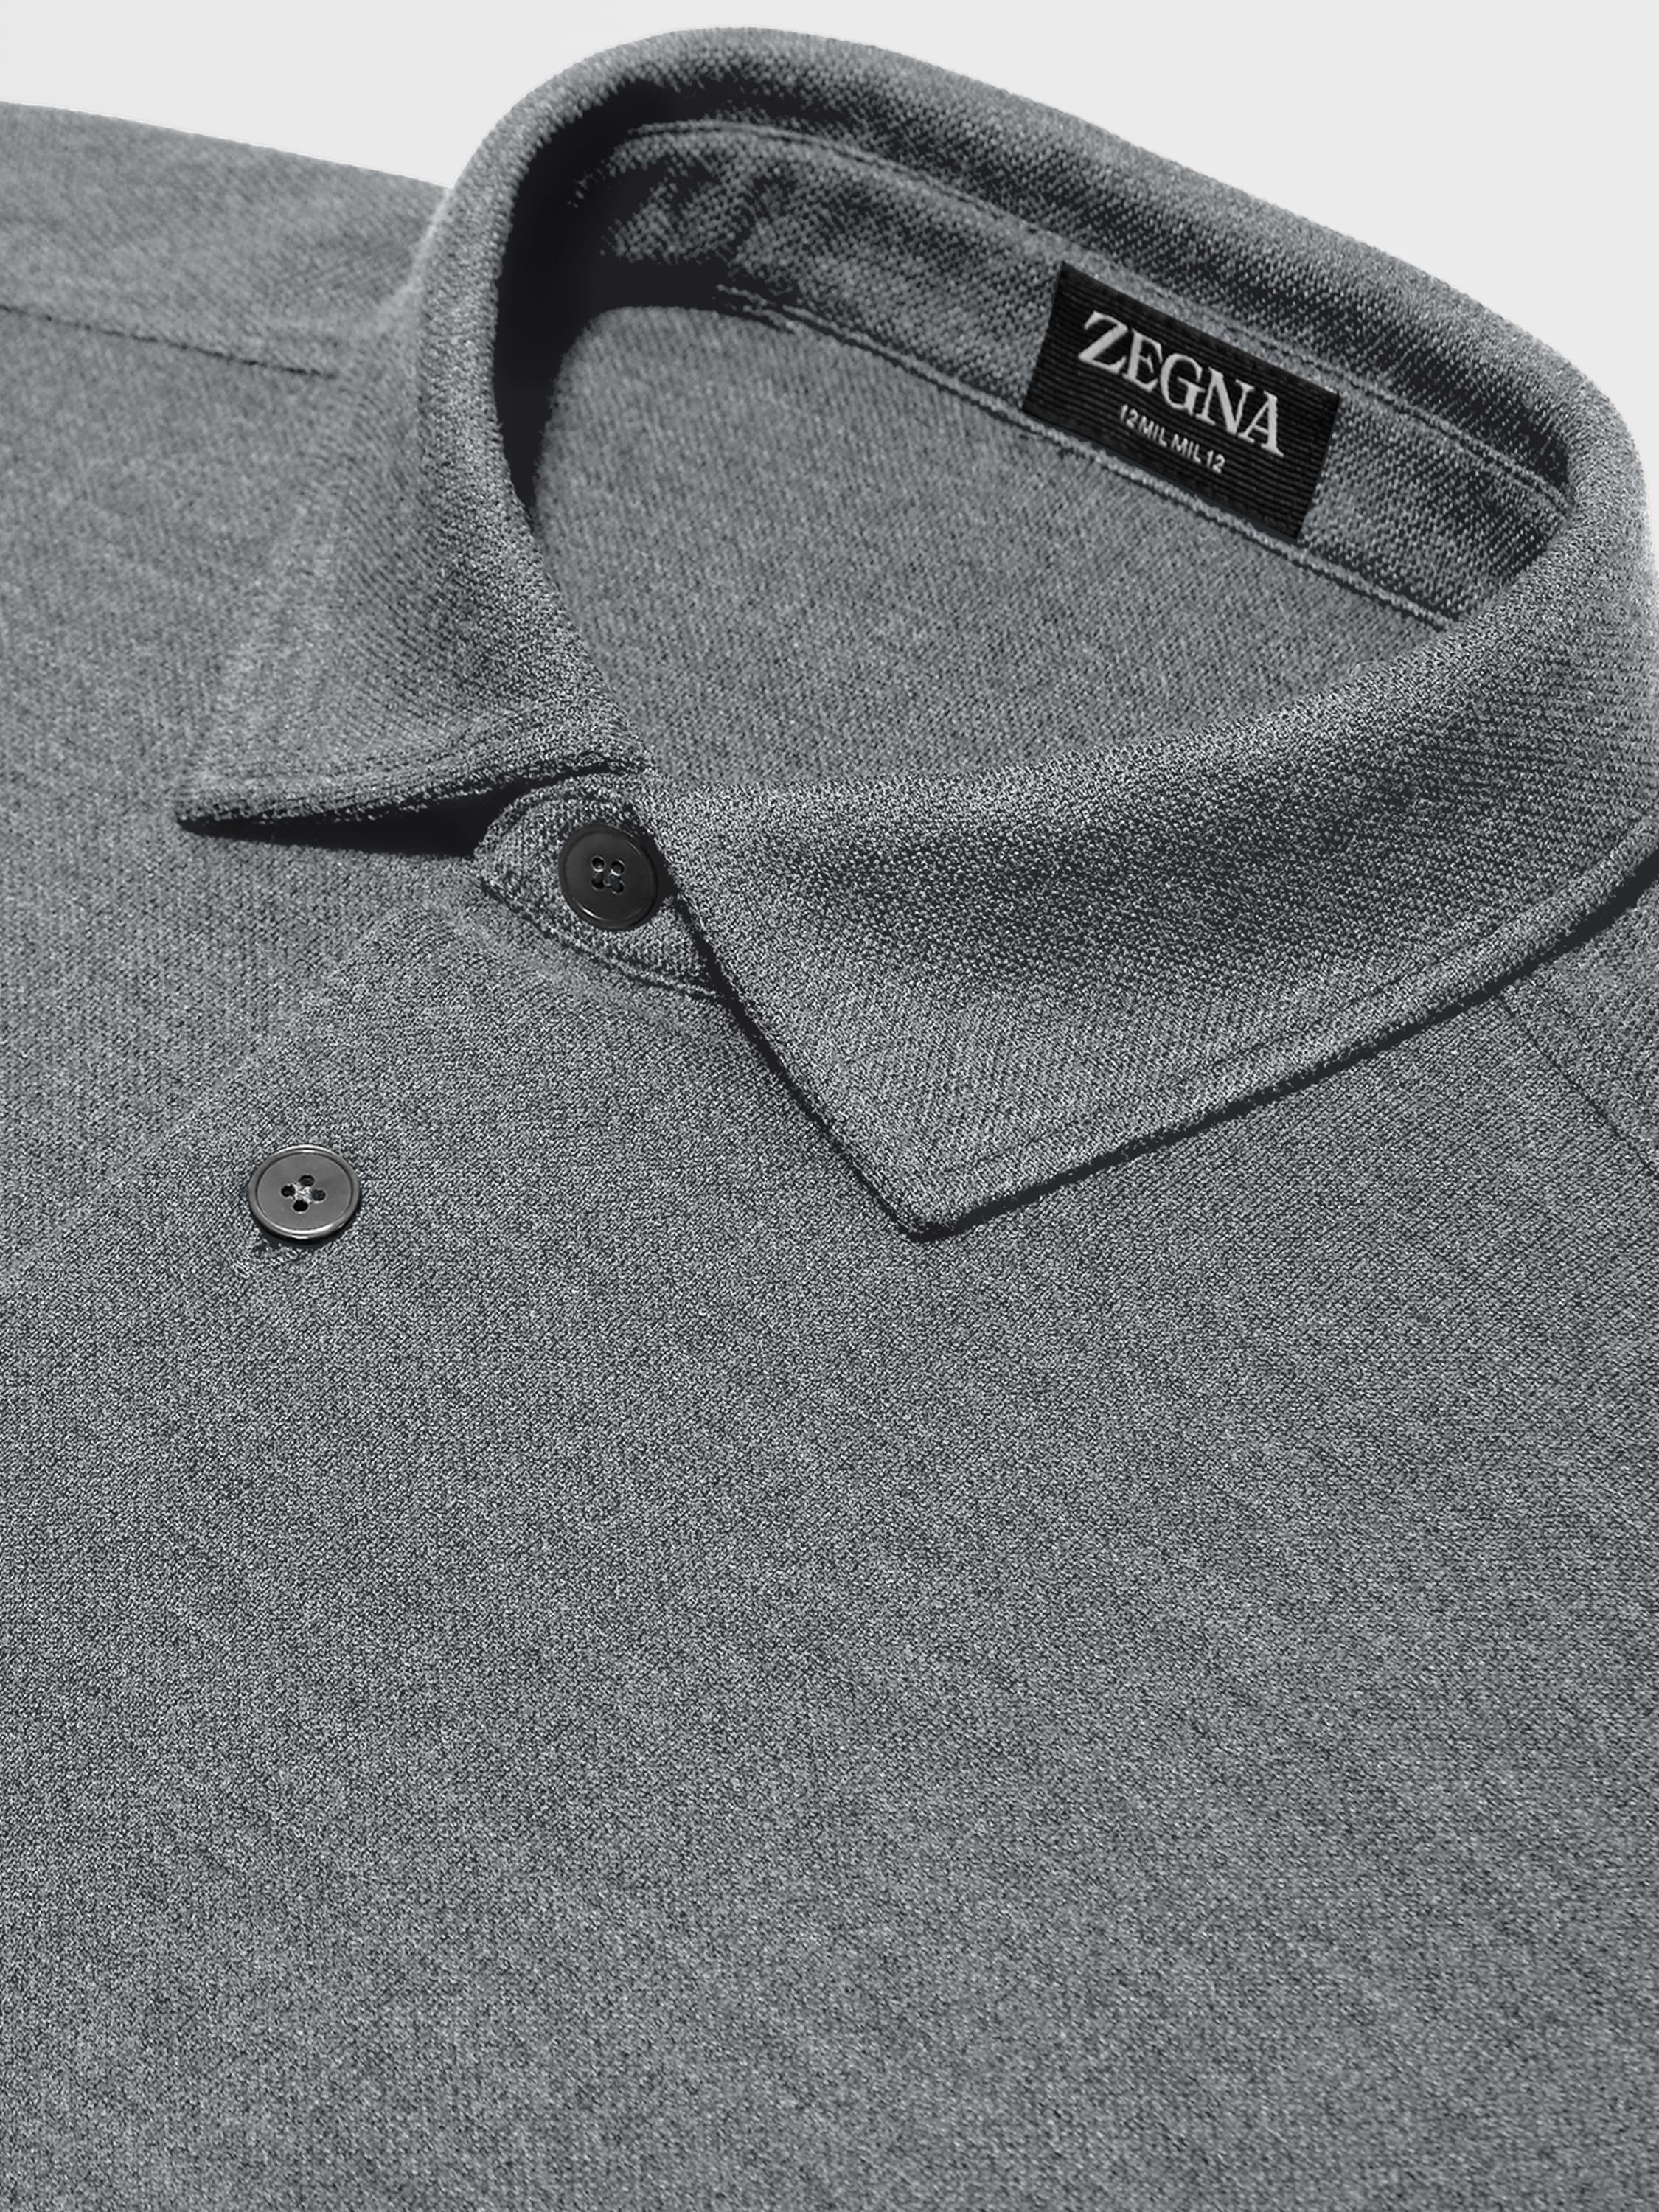 Zegna 12milmil12 Wool Polo Shirt in Gray for Men | Lyst